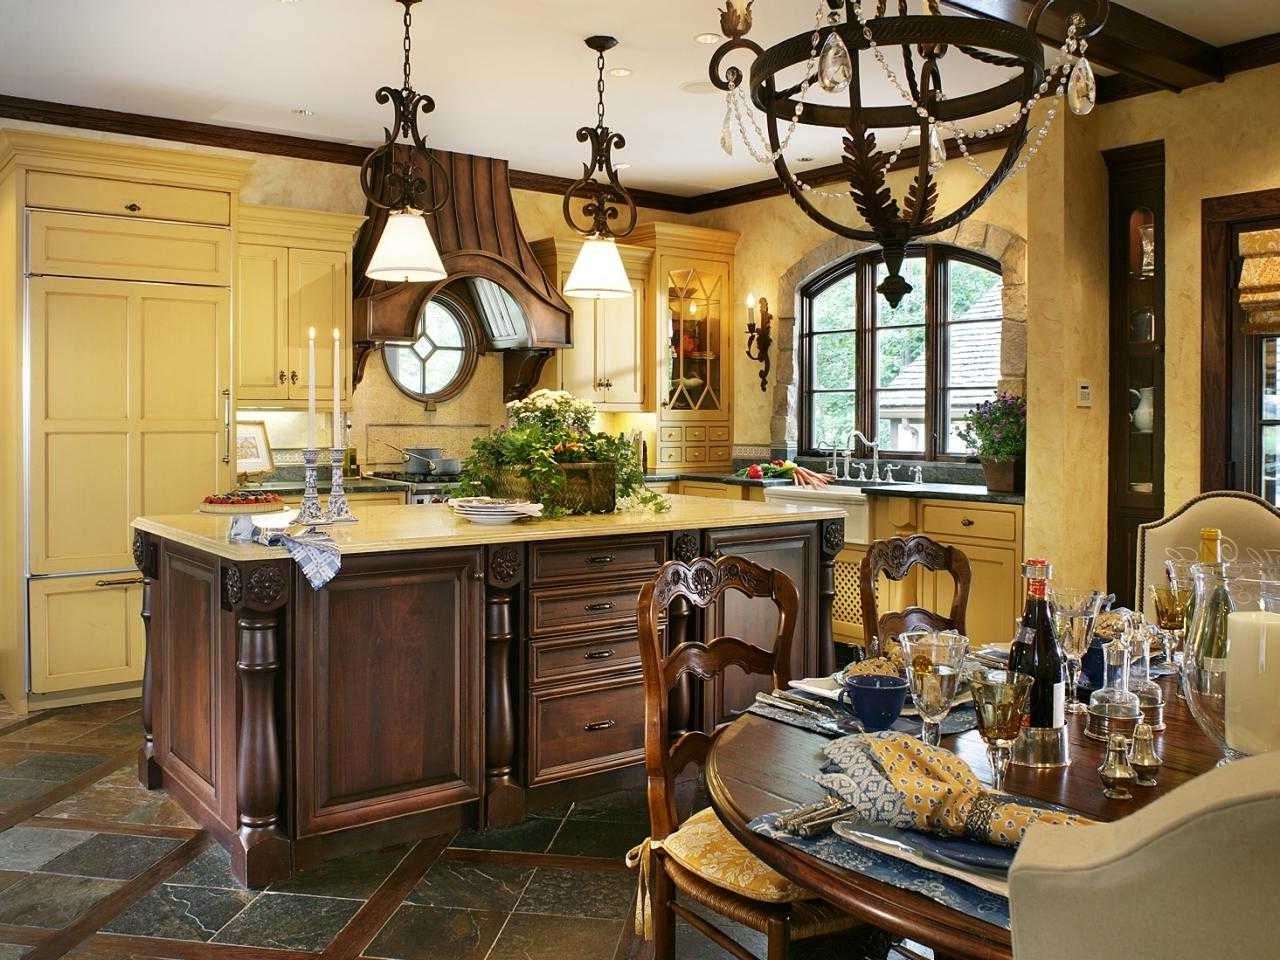 Widely Used French Country Chandeliers For Kitchen Pertaining To French Country Lighting Fixtures Kitchen Pictures Design Amazing (View 7 of 15)